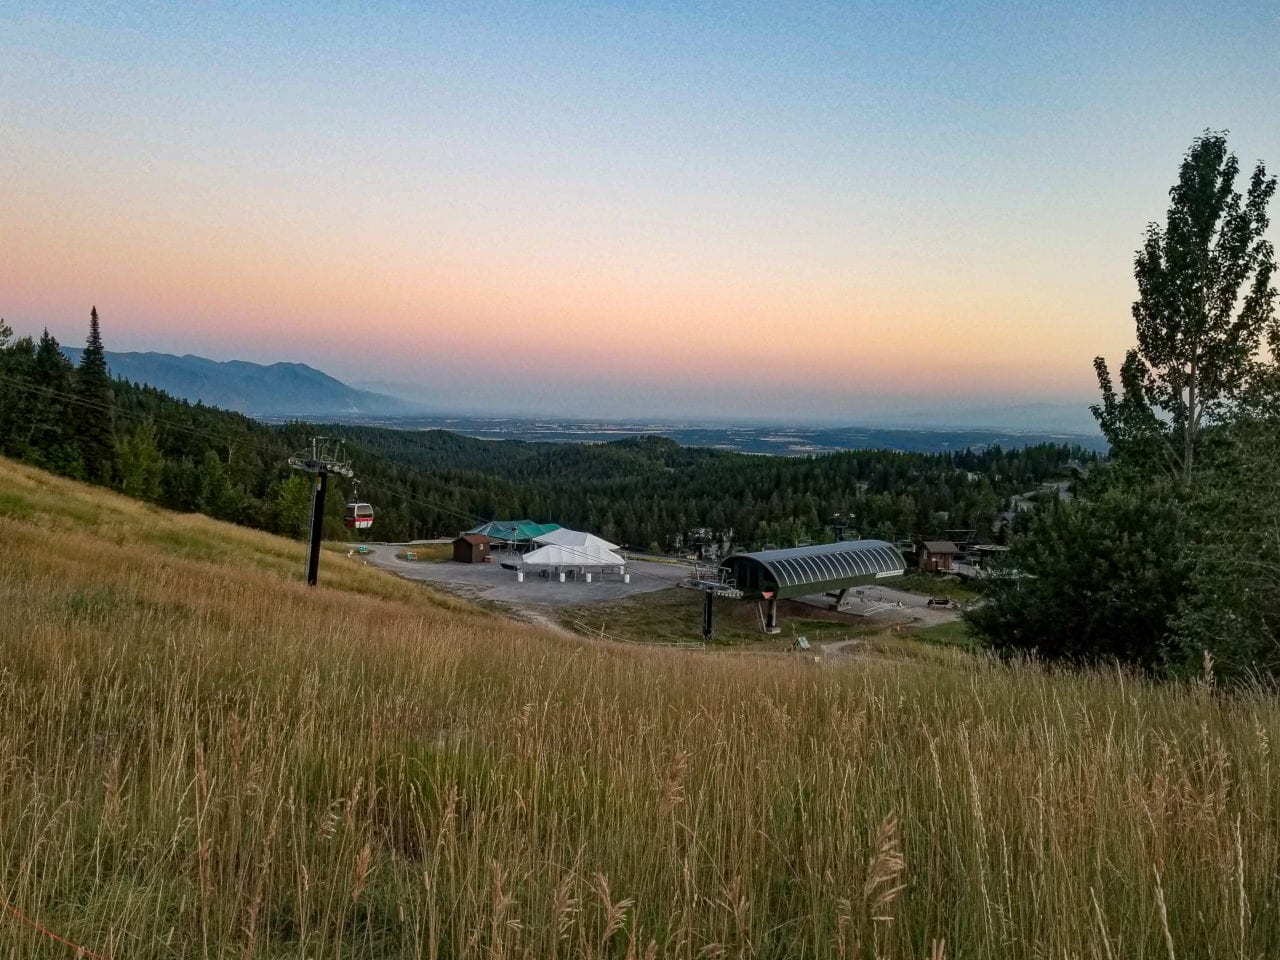 Whitefish Mountain Resort on a late summer sunset